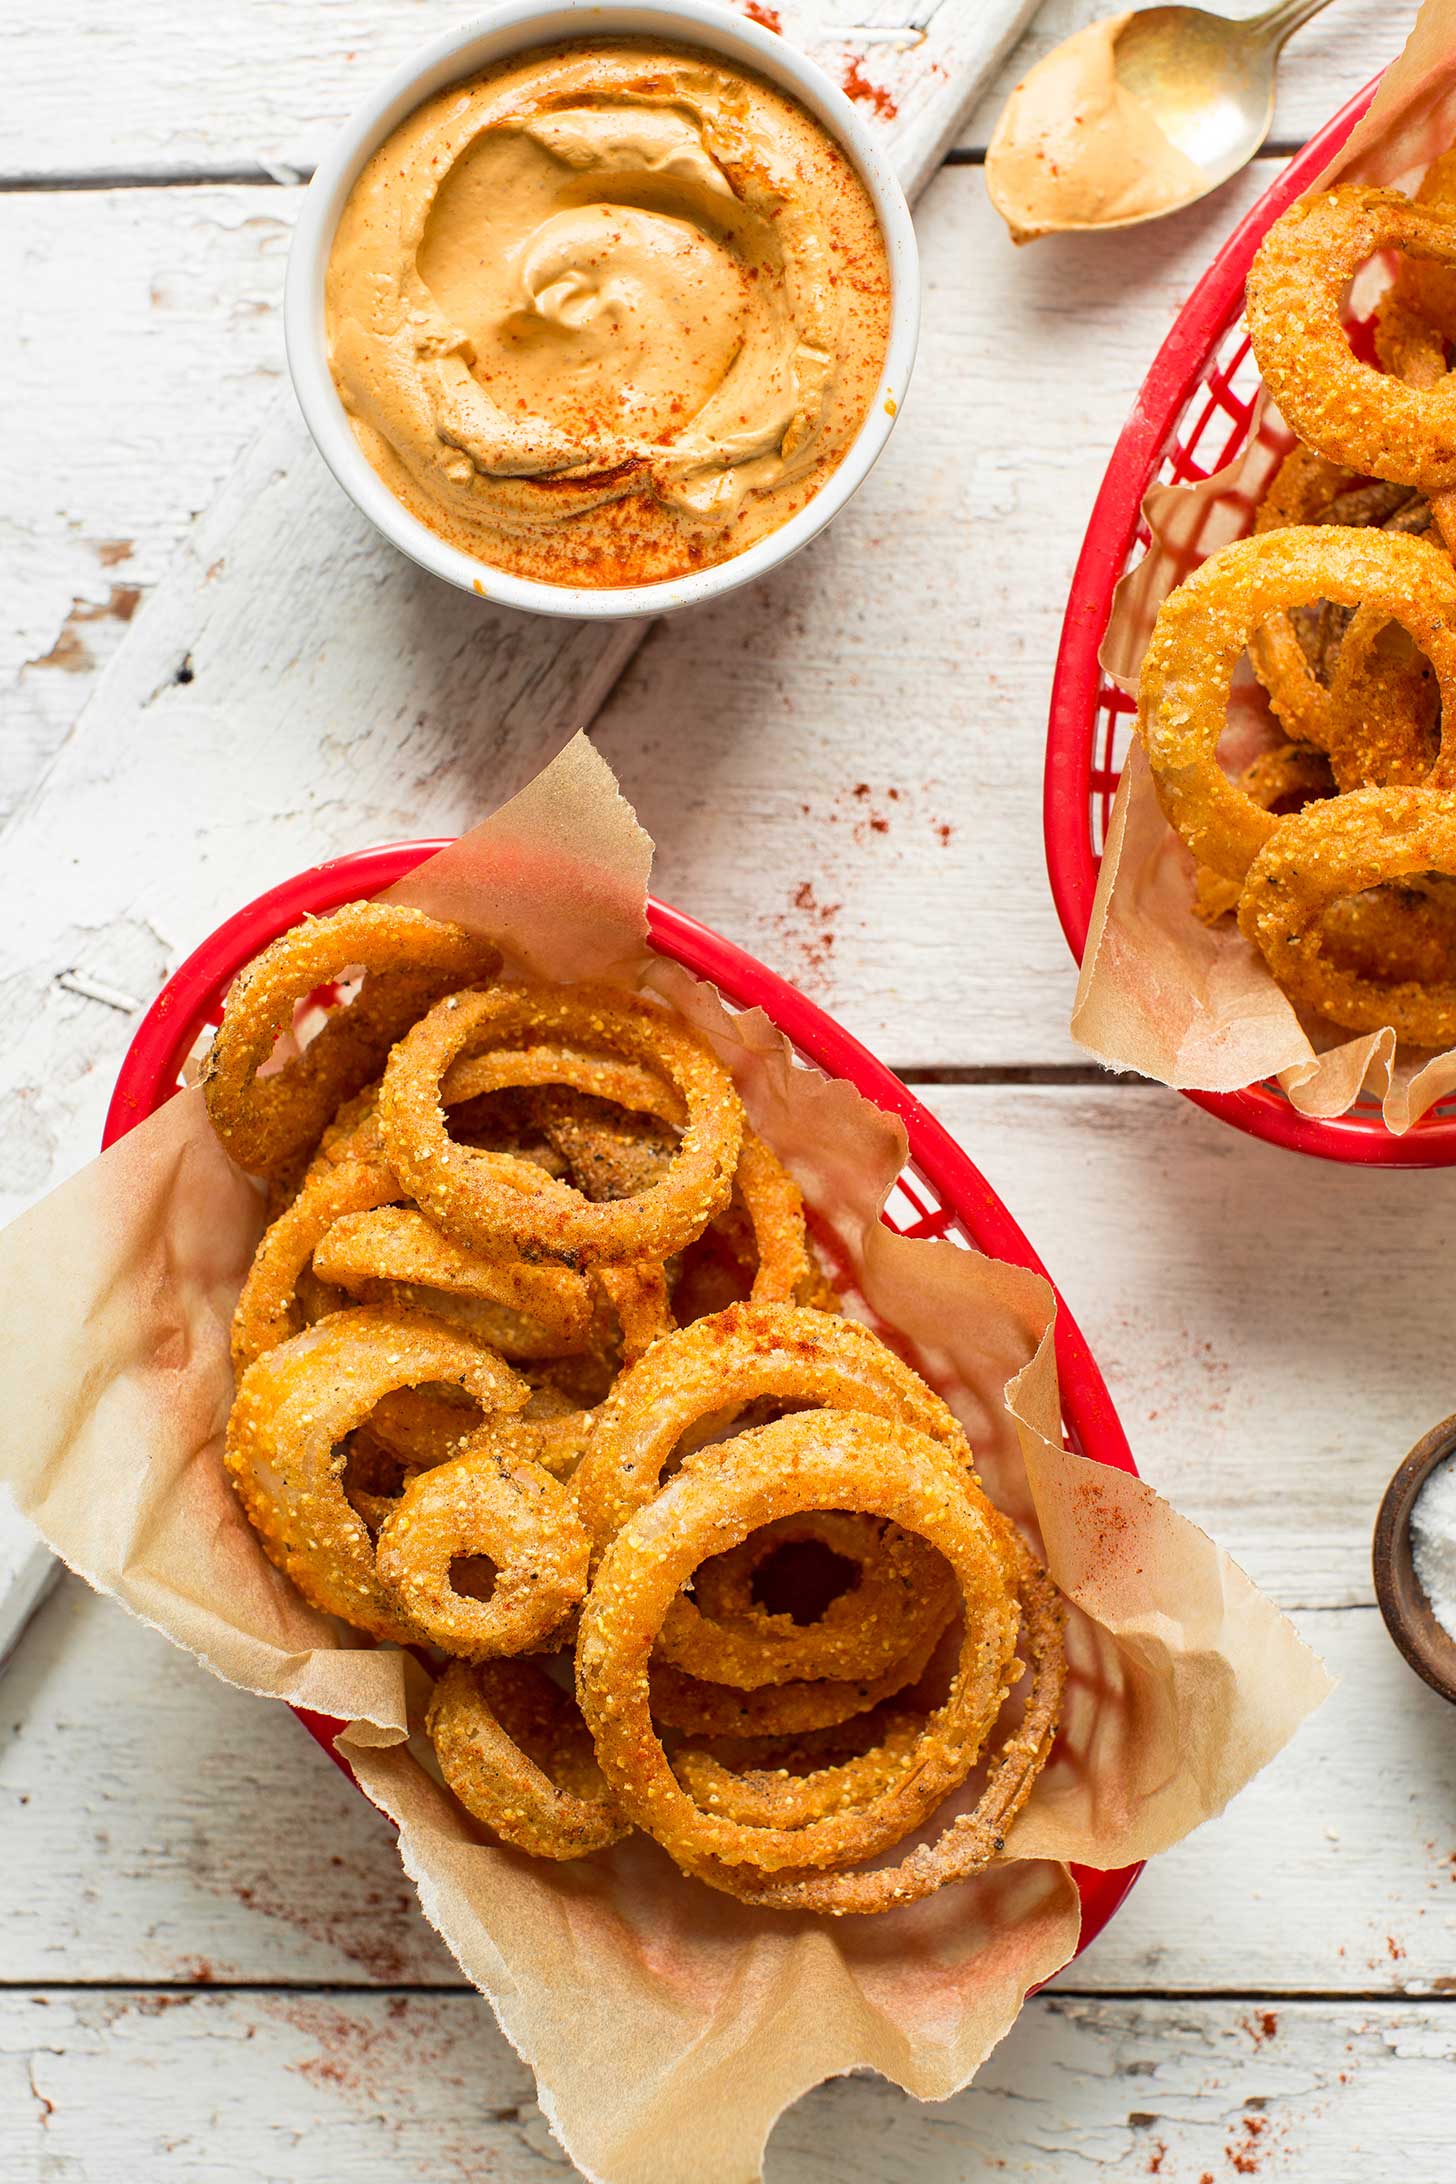 Containers of gluten-free onion rings and vegan chipotle dipping sauce for an indulgent snack